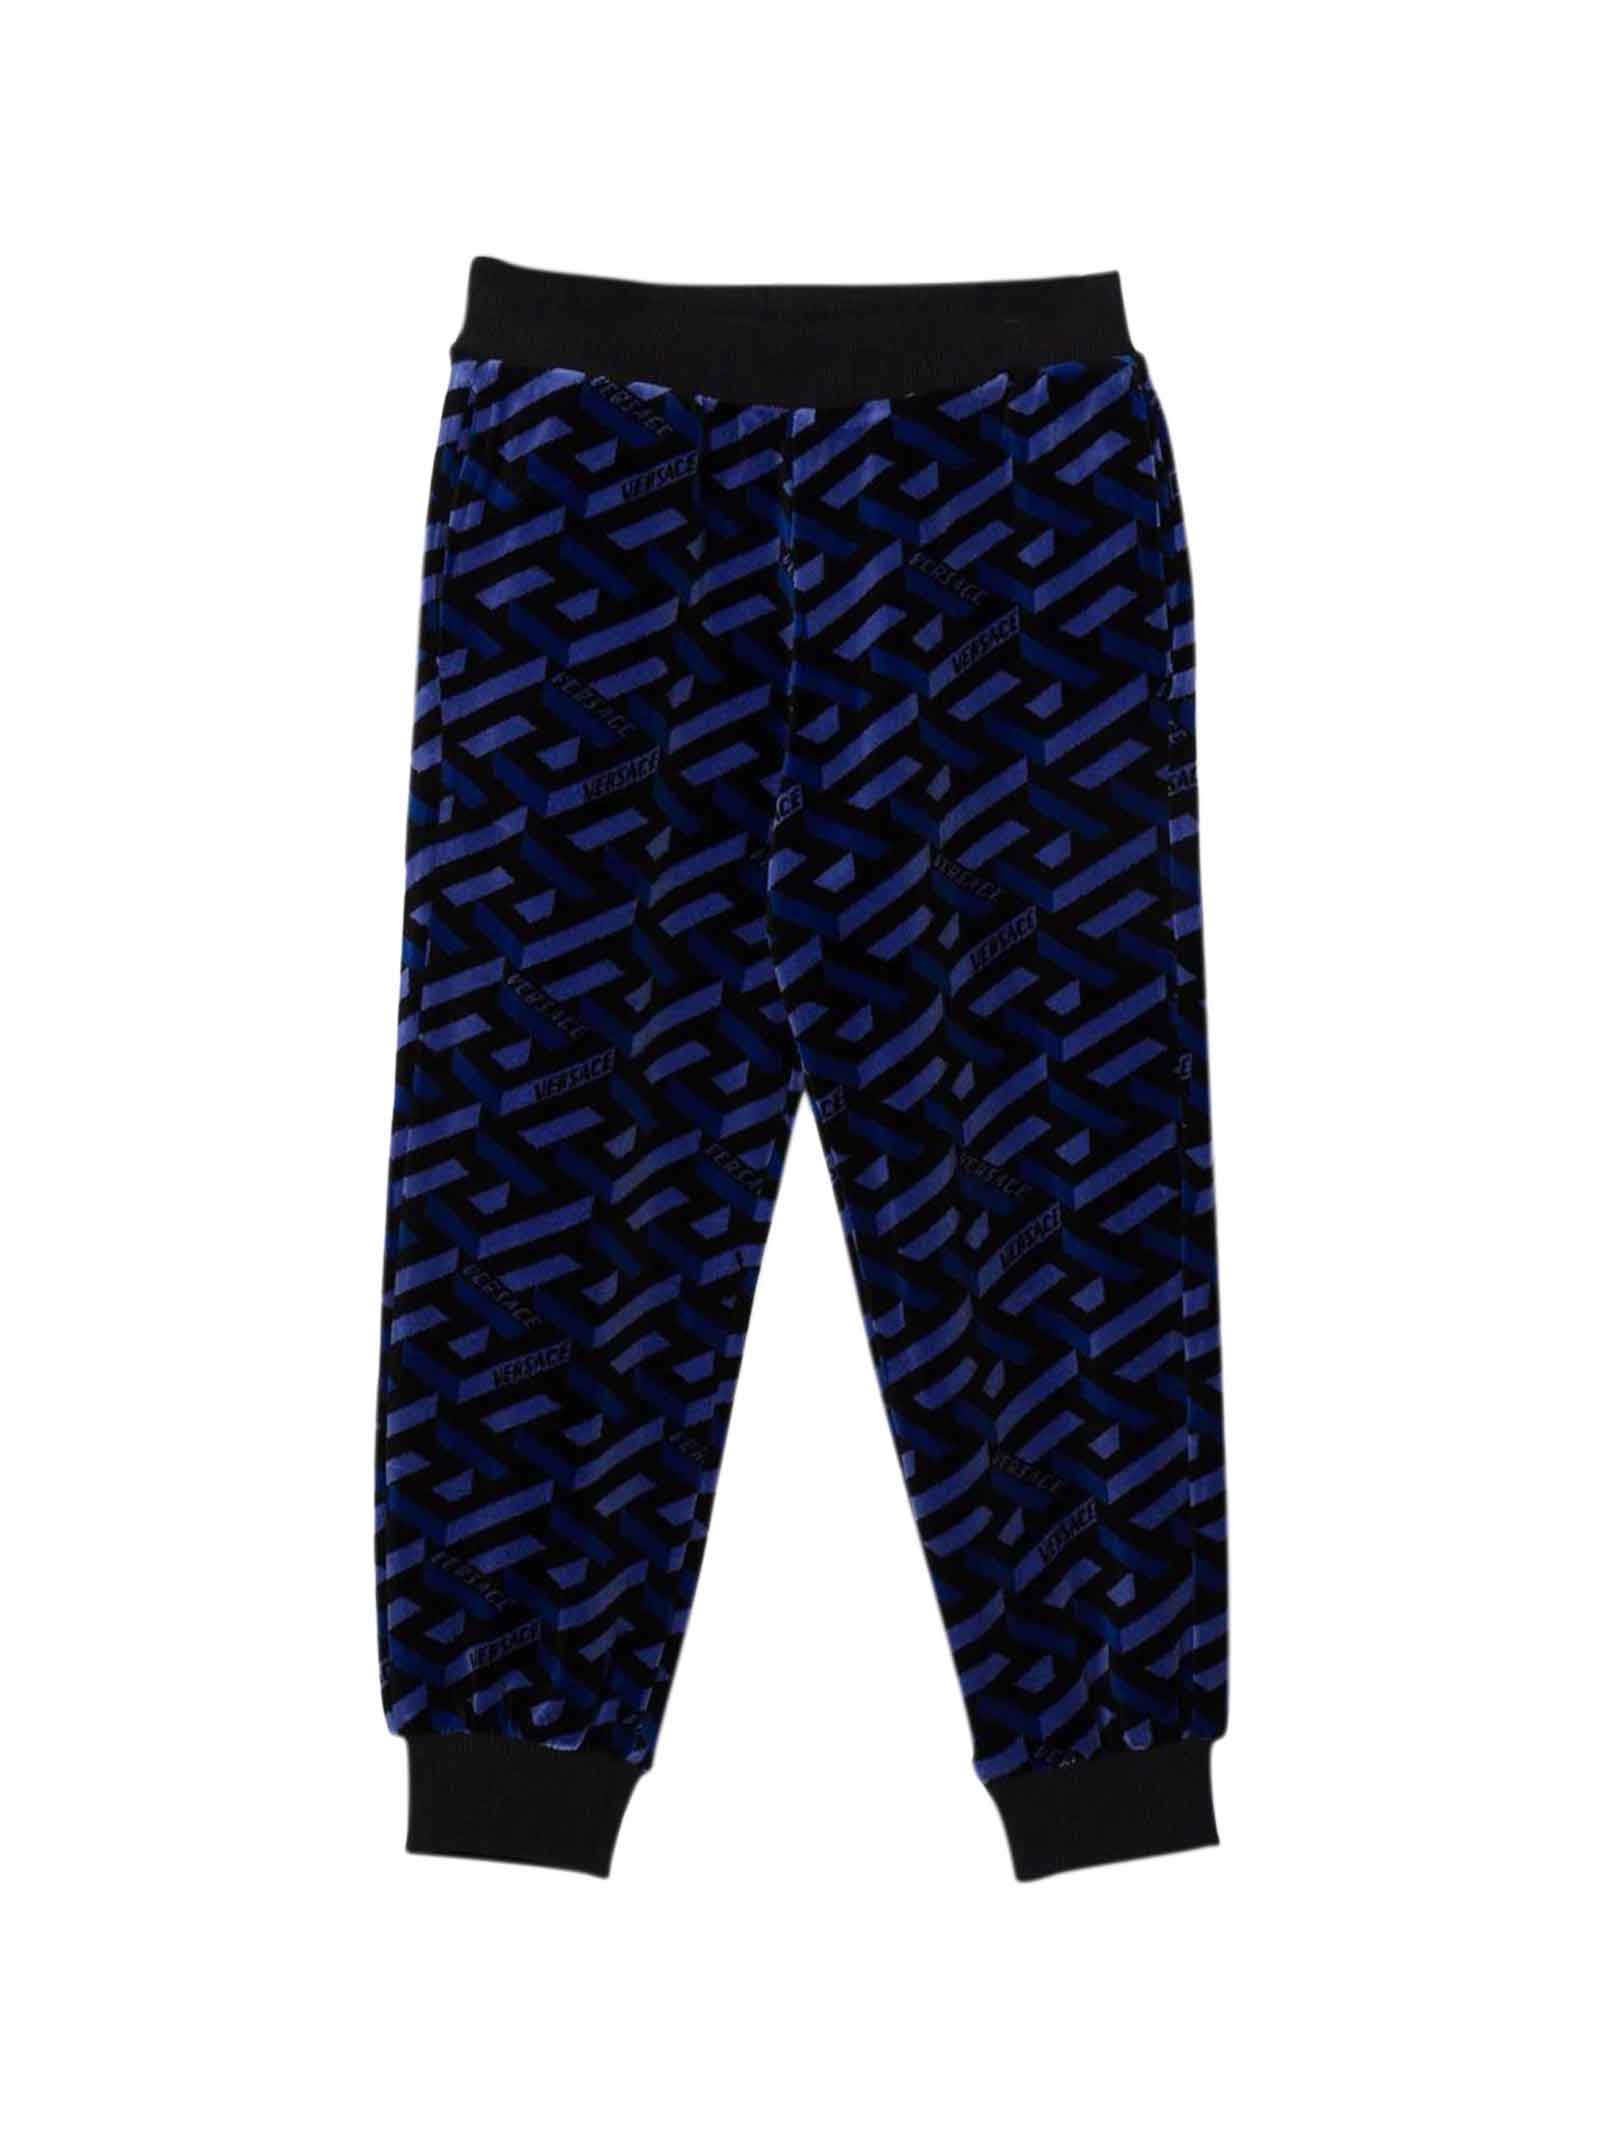 Versace Black And Blue Trousers With Print Kids